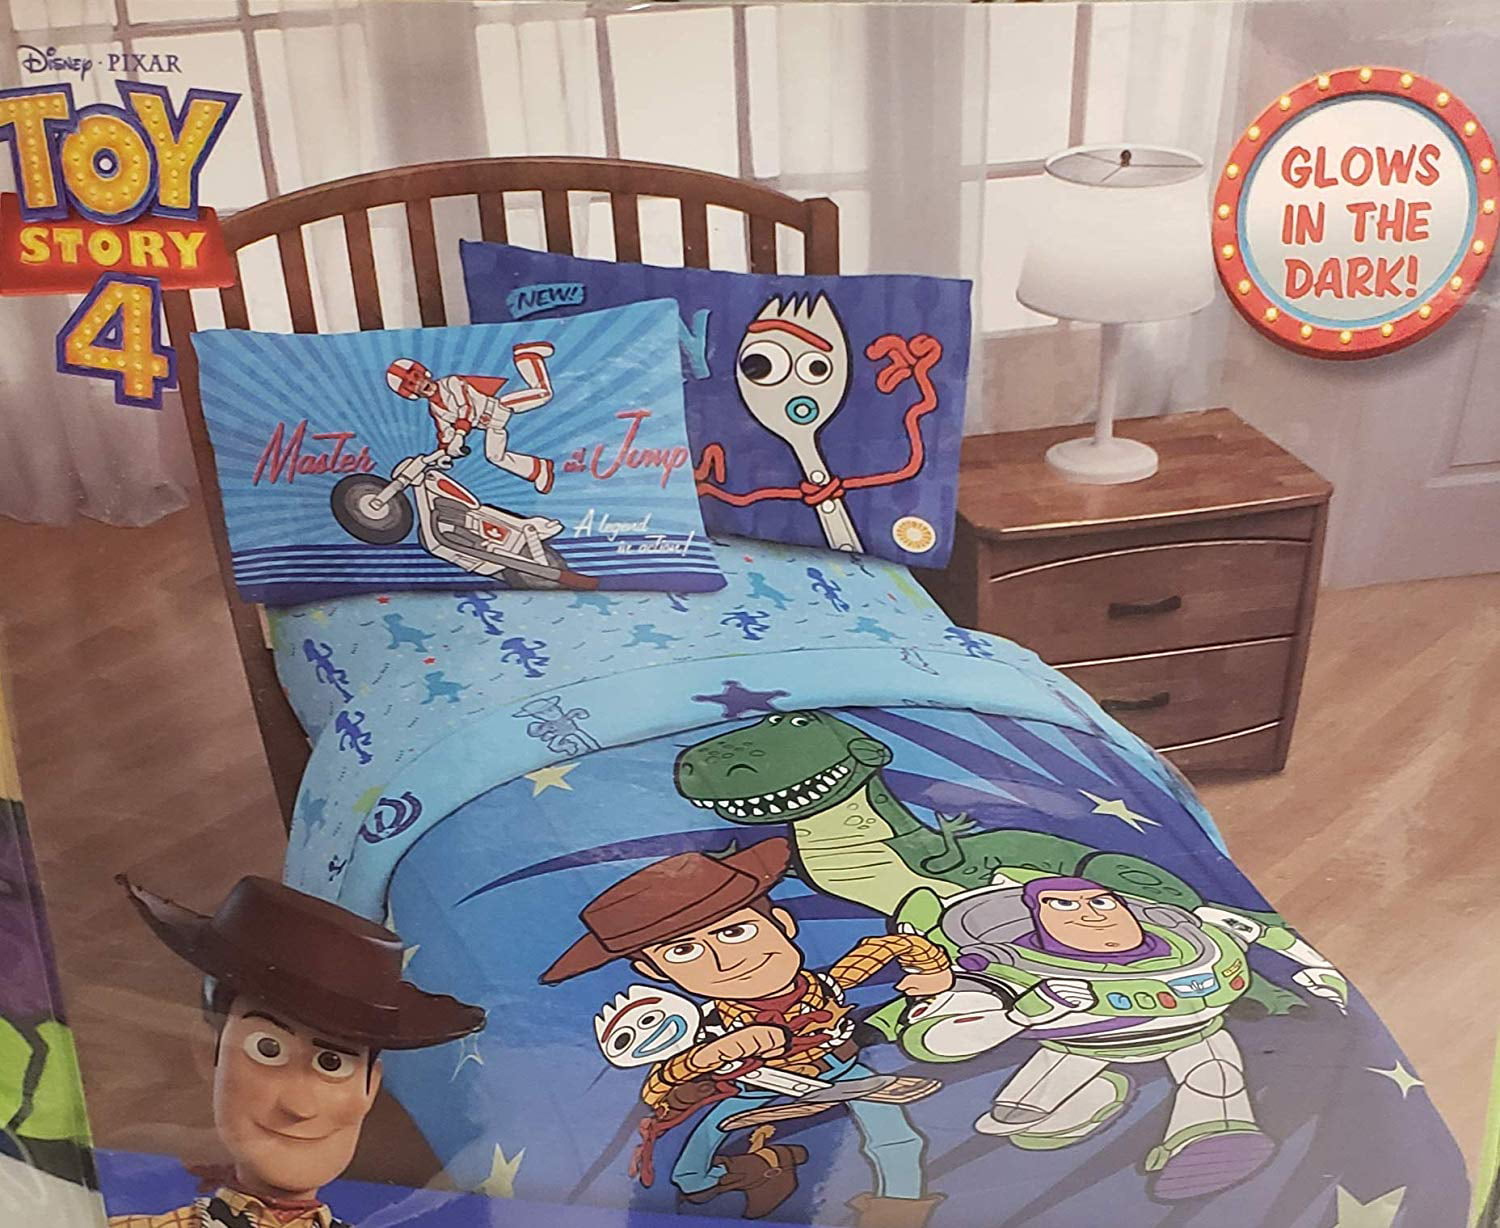 Toy Story 4 Glow In The Dark Bedding Set Comforter And Sheets